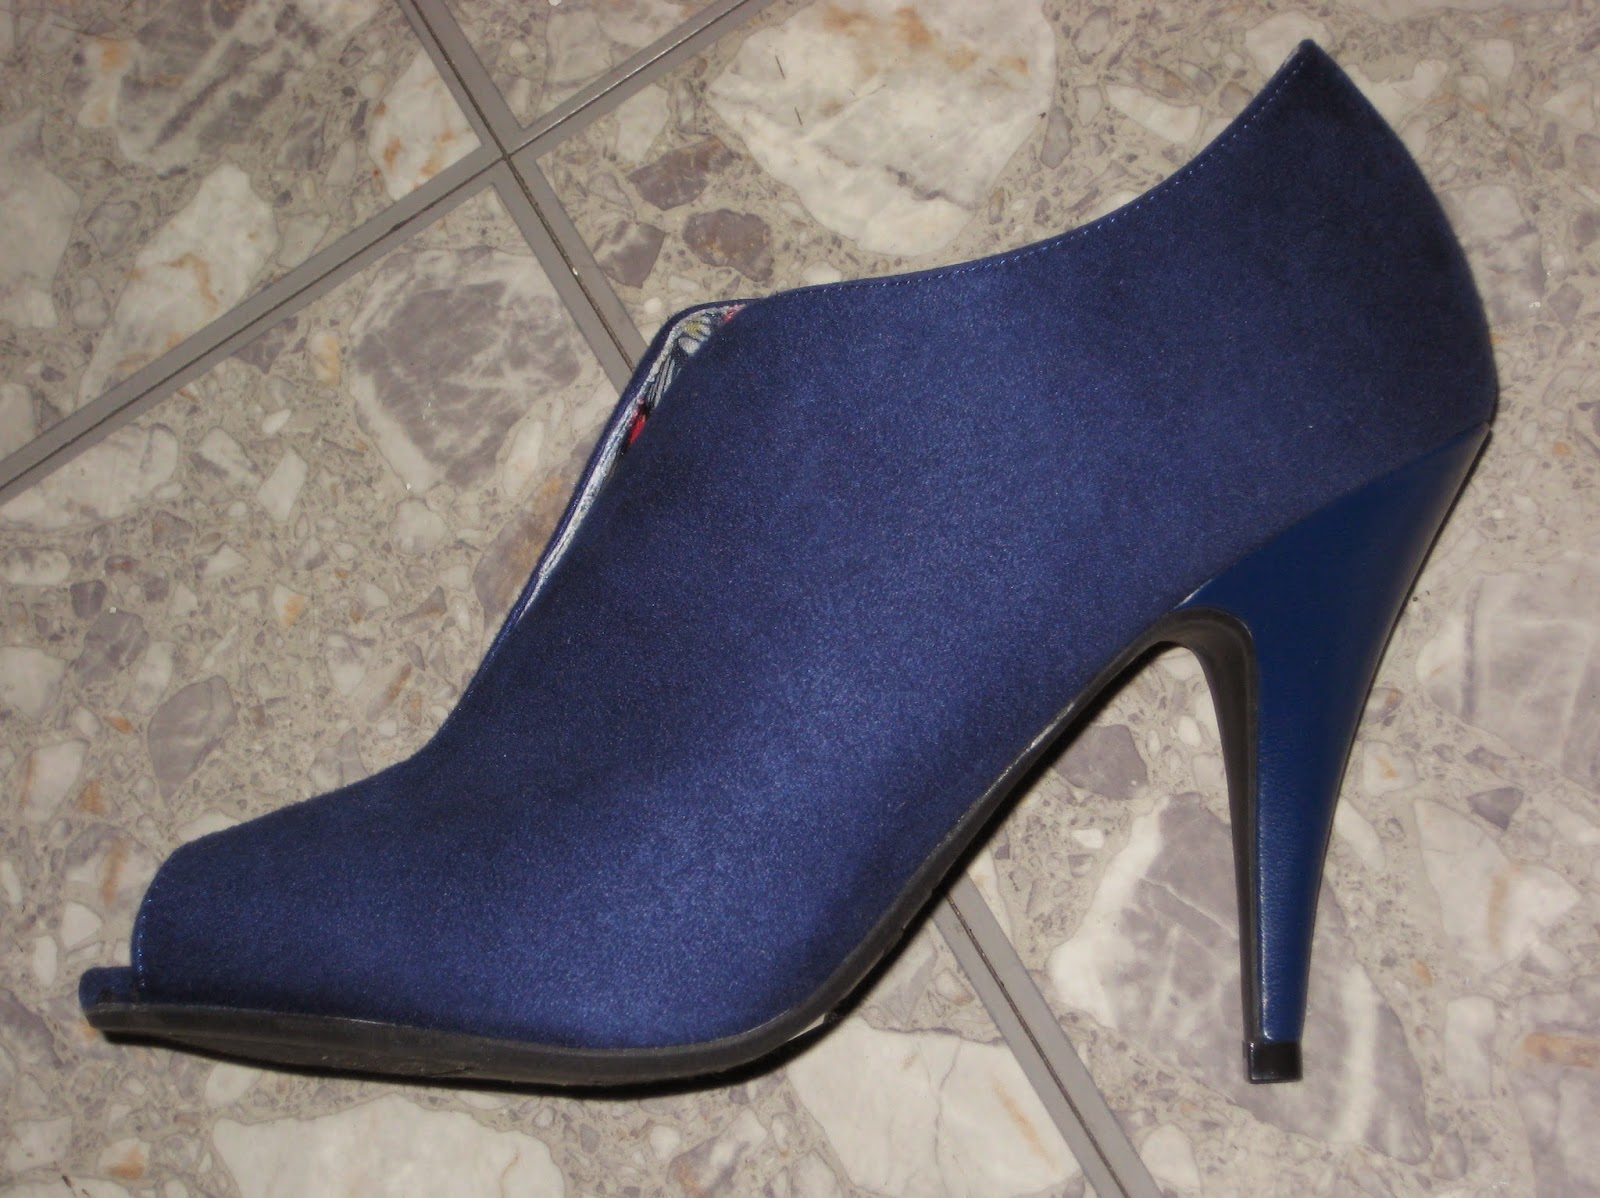 Lady Lostris Beauty: Shoe HAUL: Forever 21, JustFab  Payless